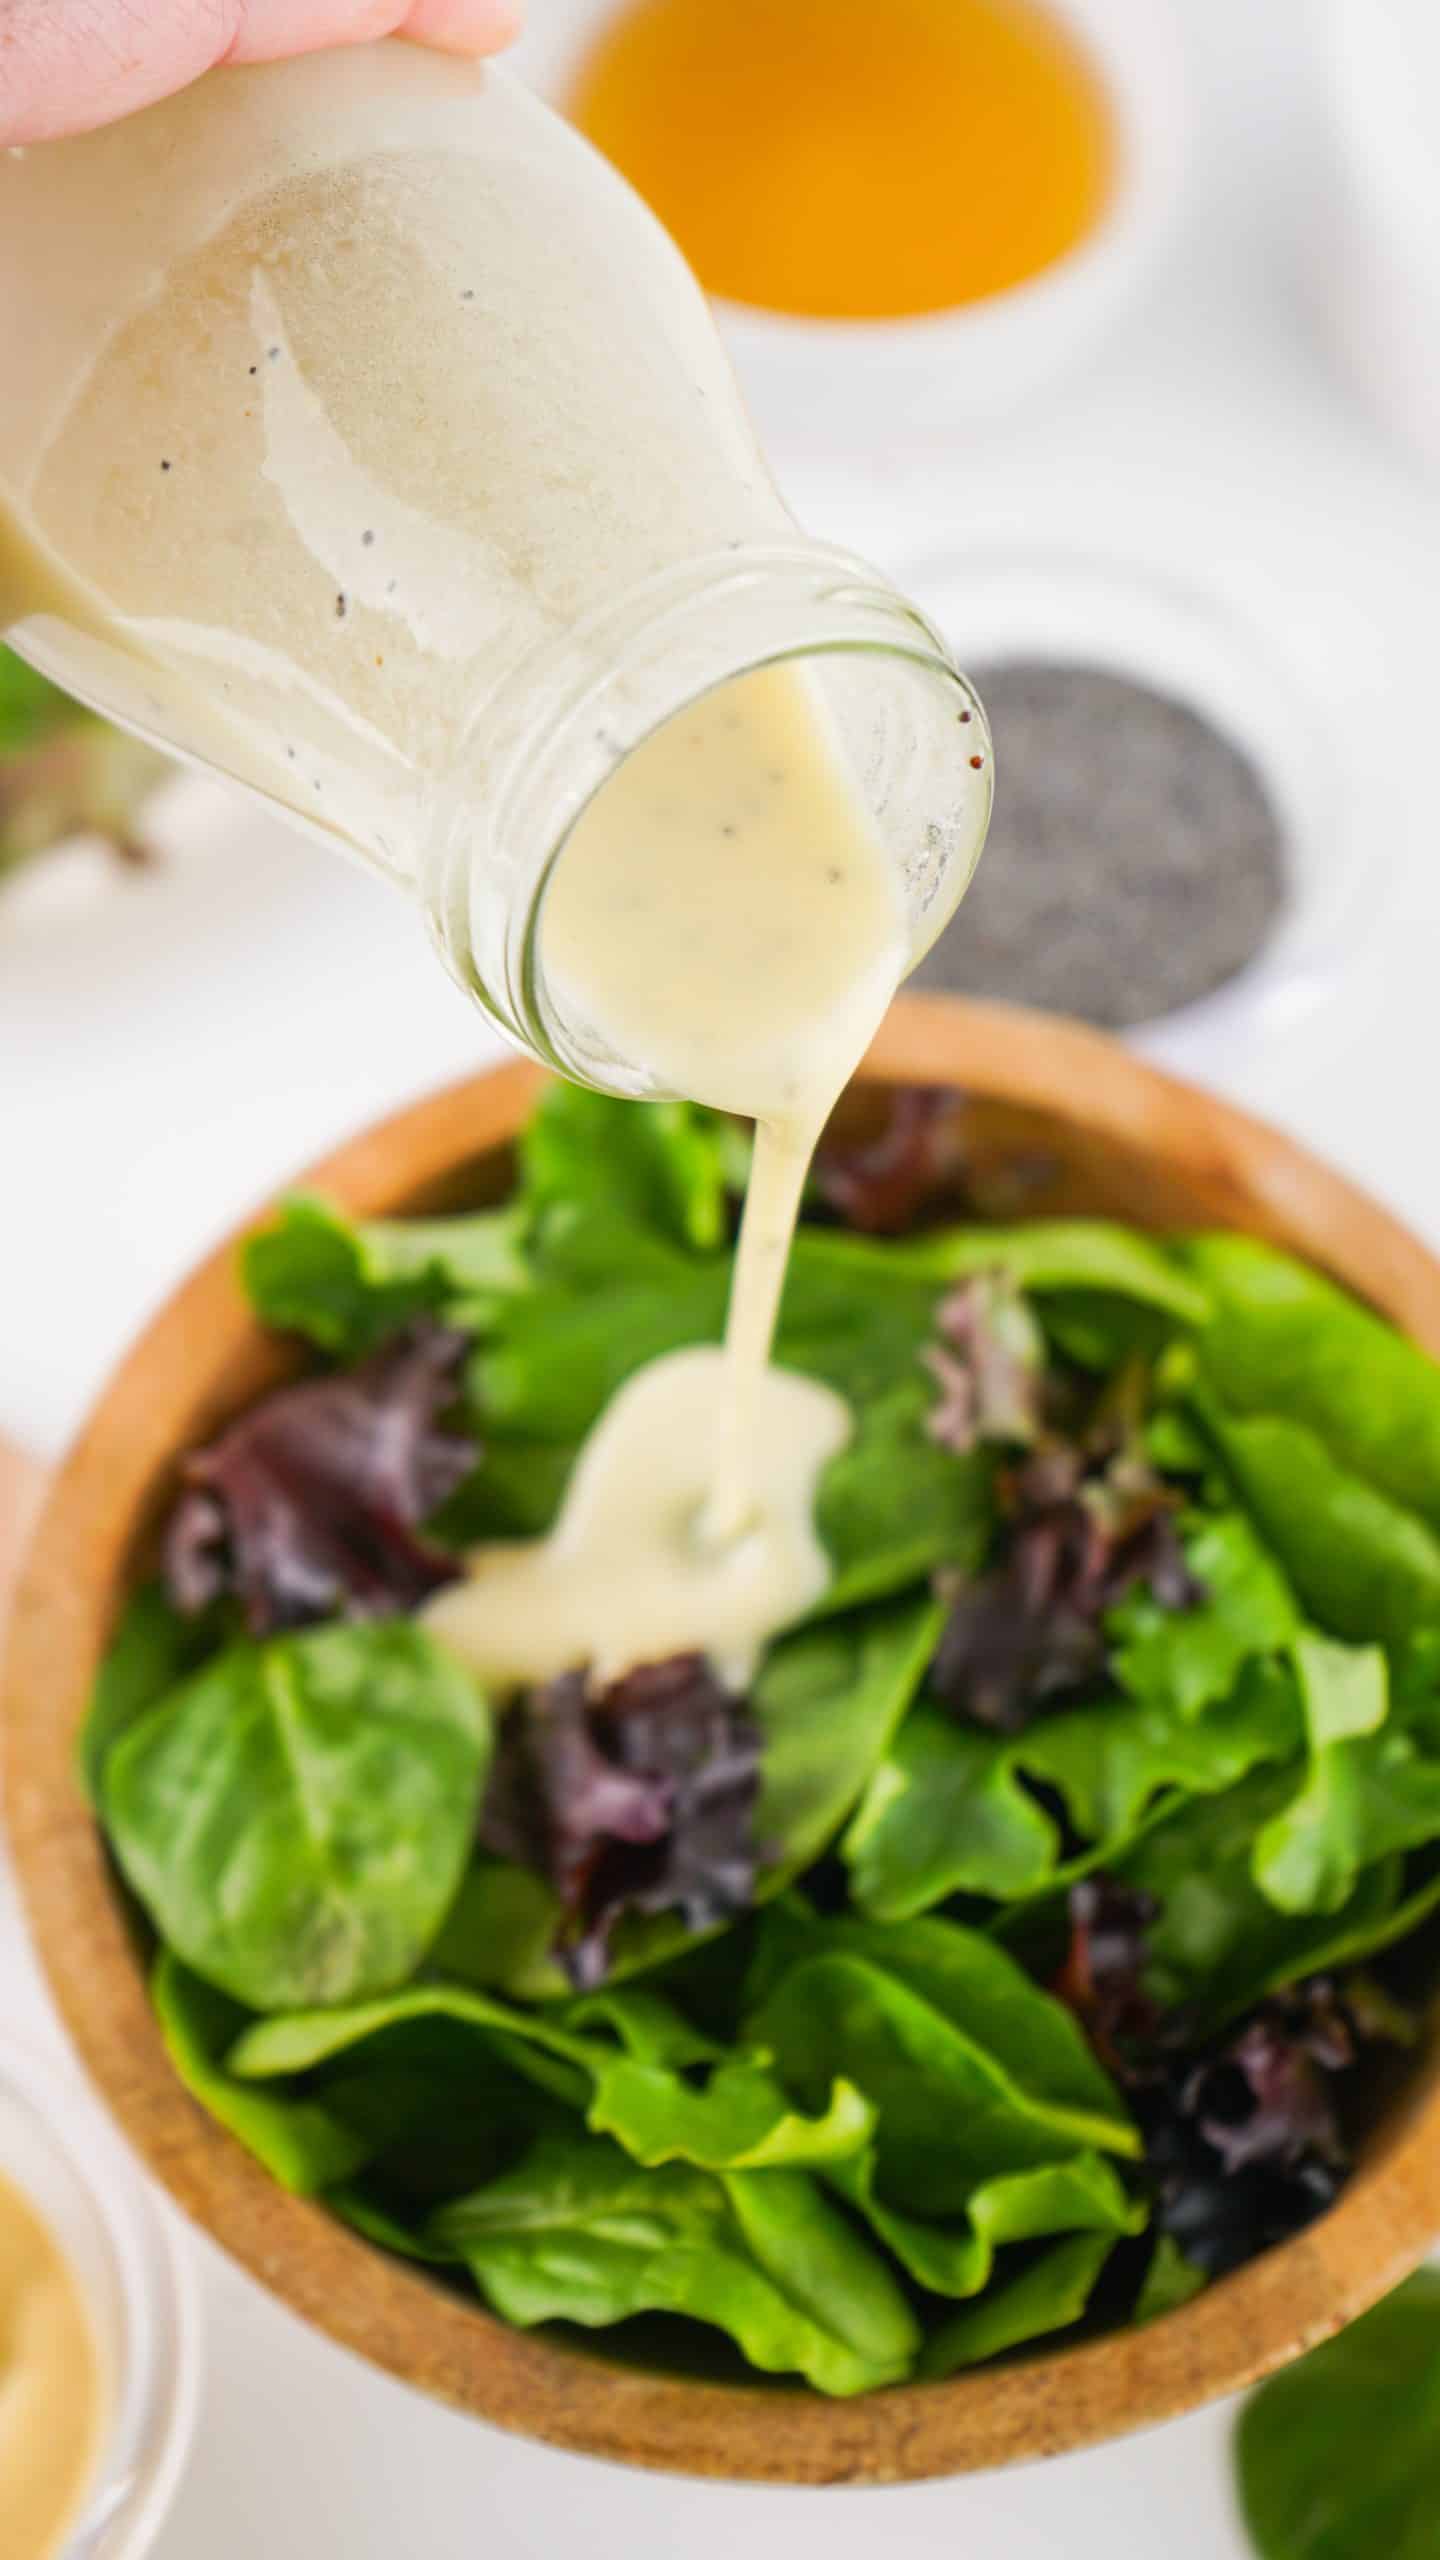 poppy seed dressing recipe being poured out of a glass jar over salad greens in a wooden bowl